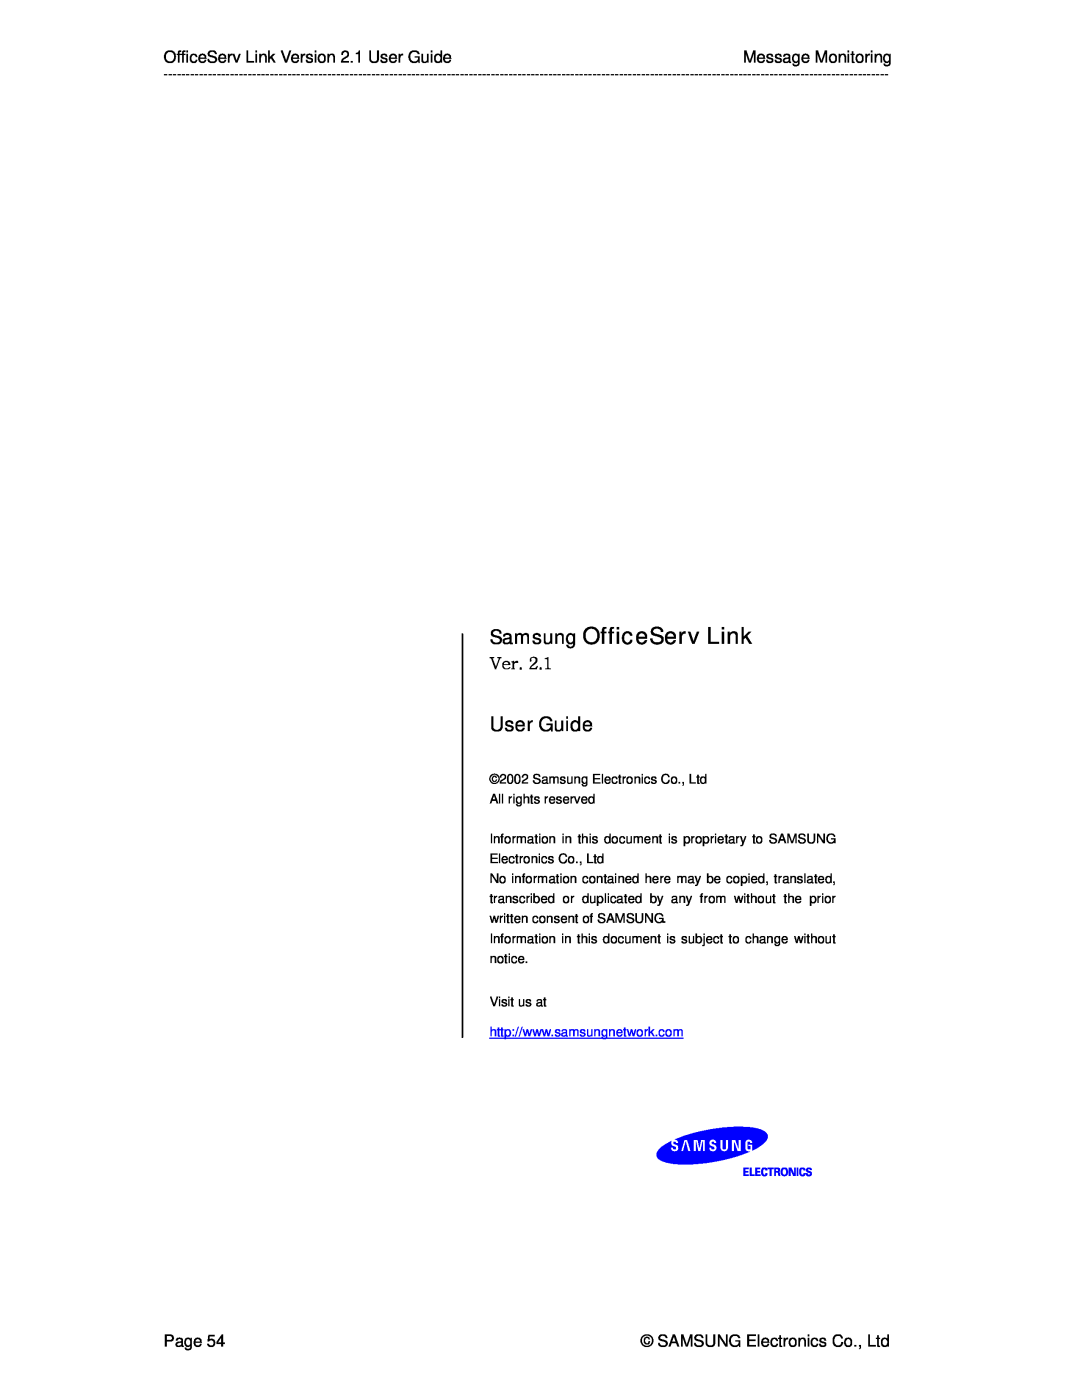 Samsung Version 2.1 User Guide, Samsung OfficeServ Link, Information in this document is subject to change without notice 